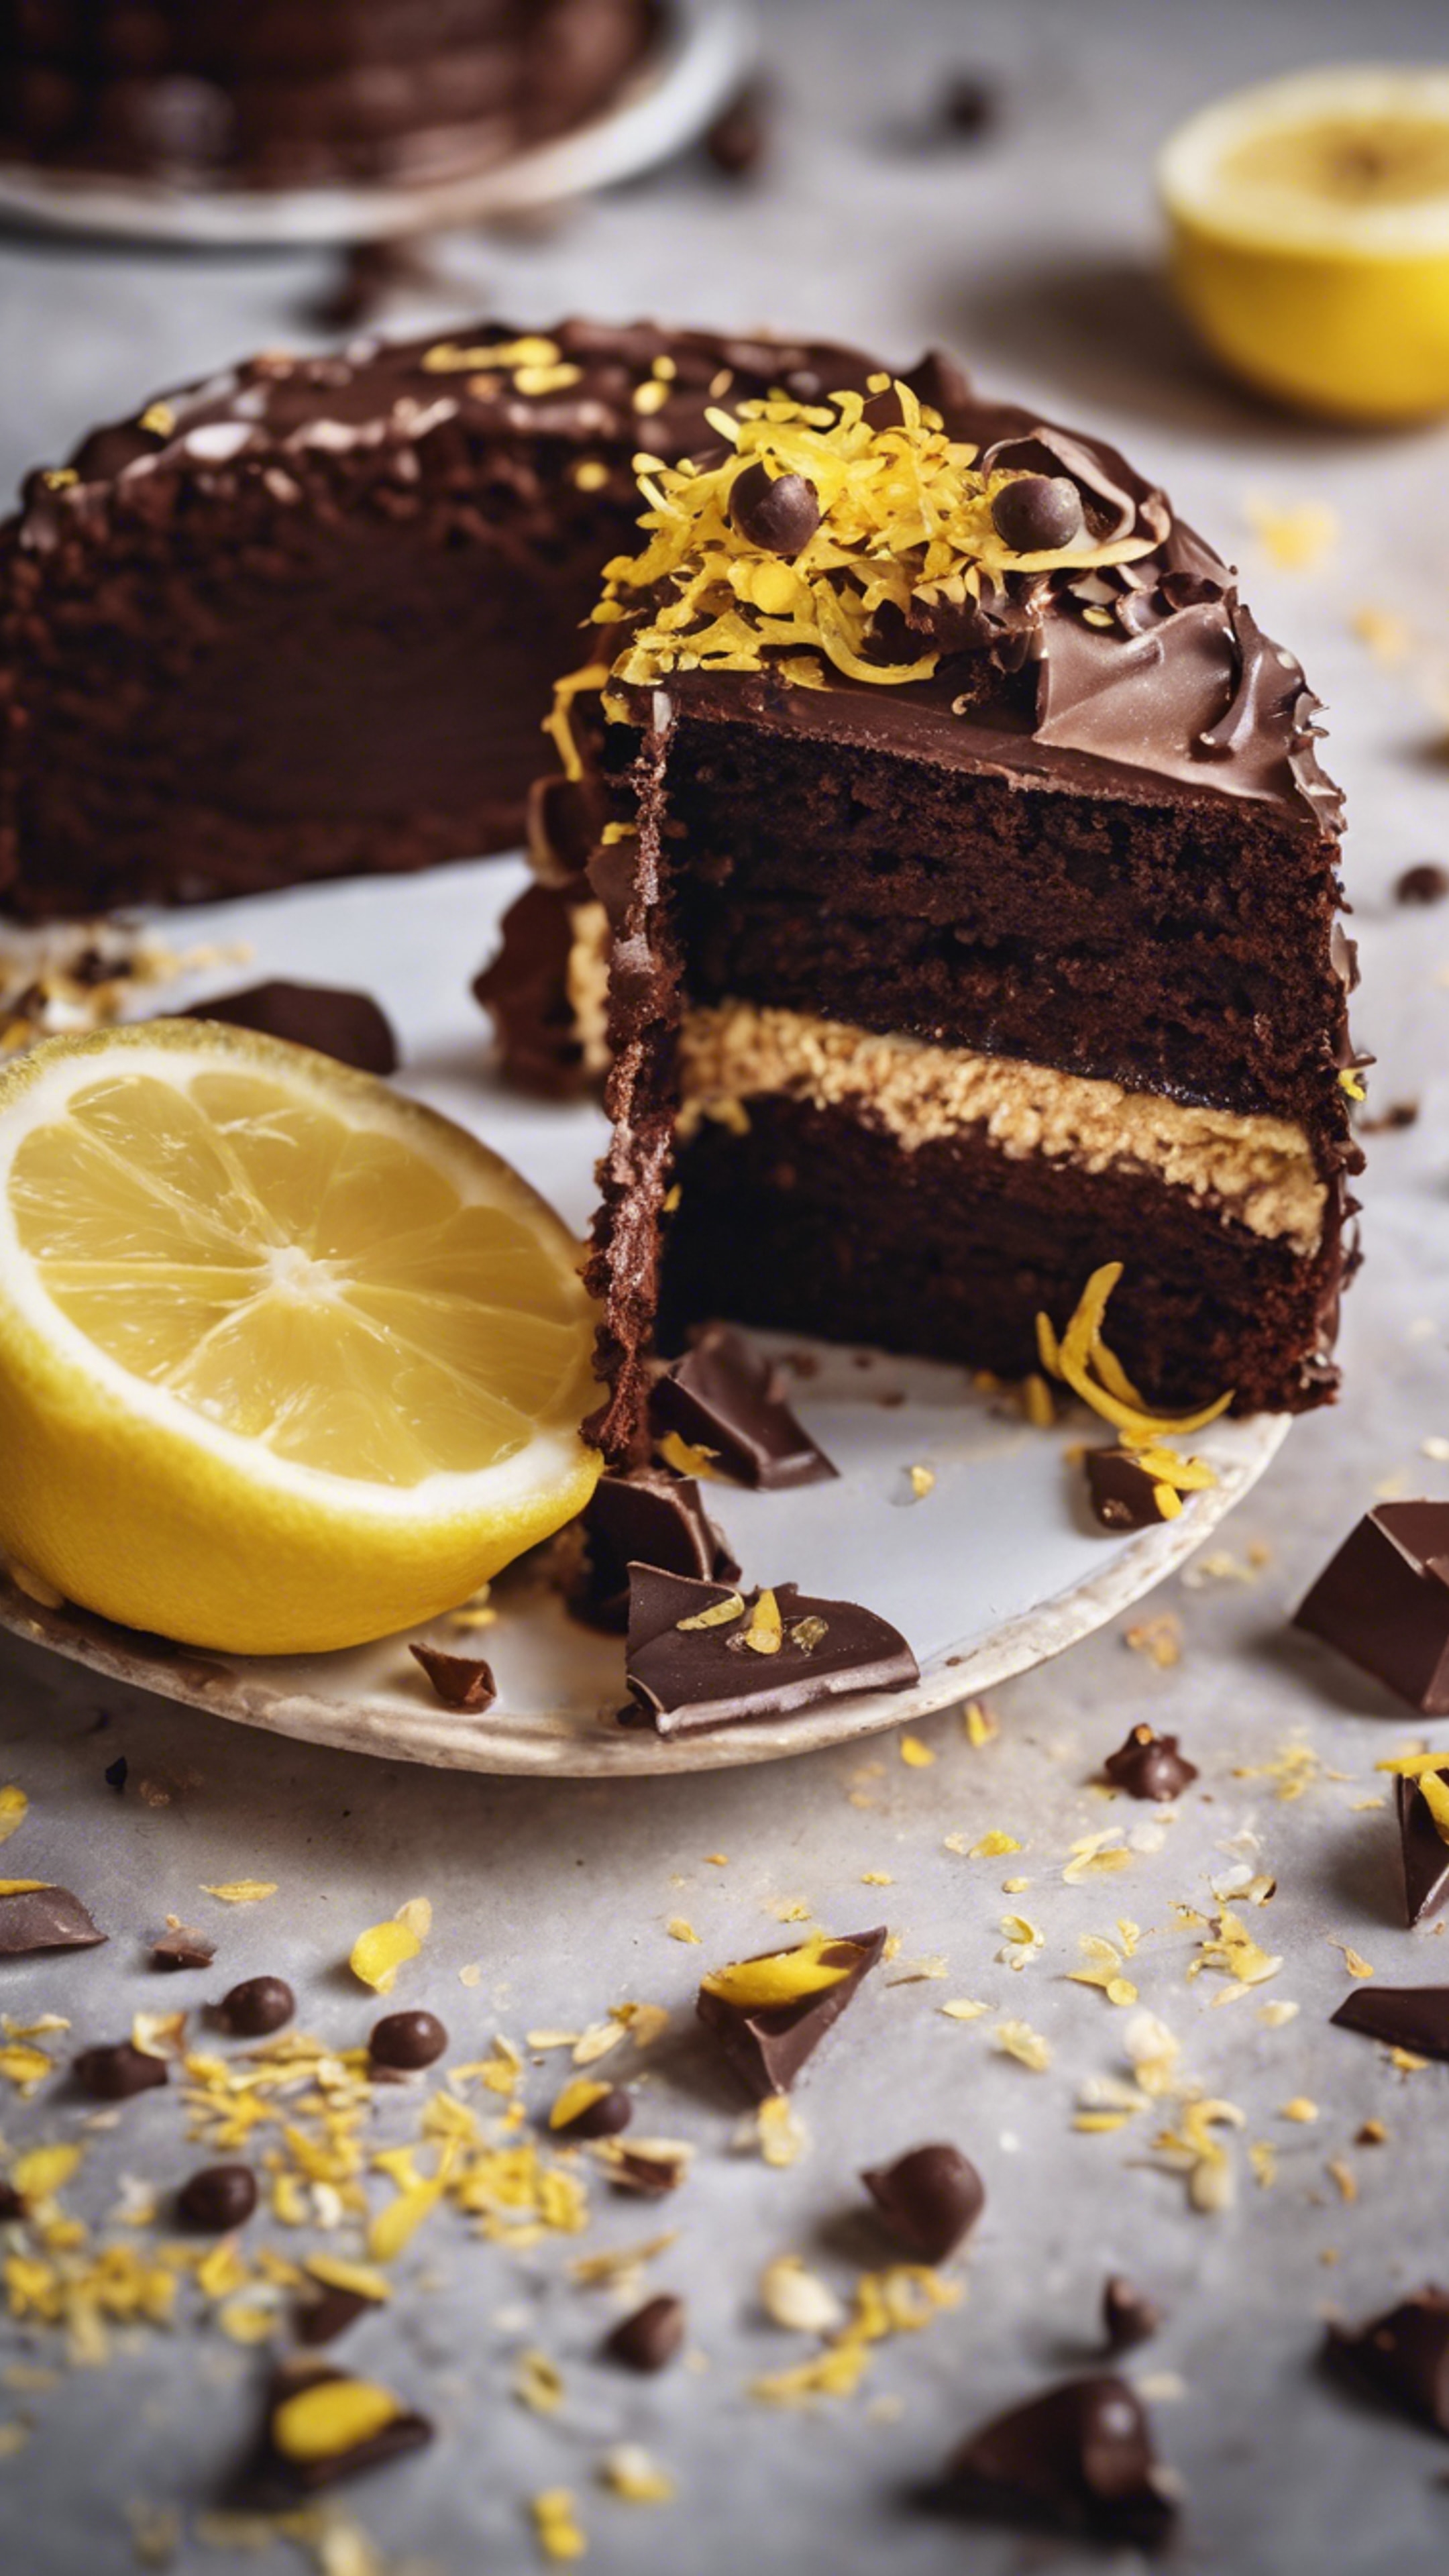 A slice of rich chocolate cake with yellow lemon zest sprinkled on top. Wallpaper[a5c73c6ece1941b4ba95]